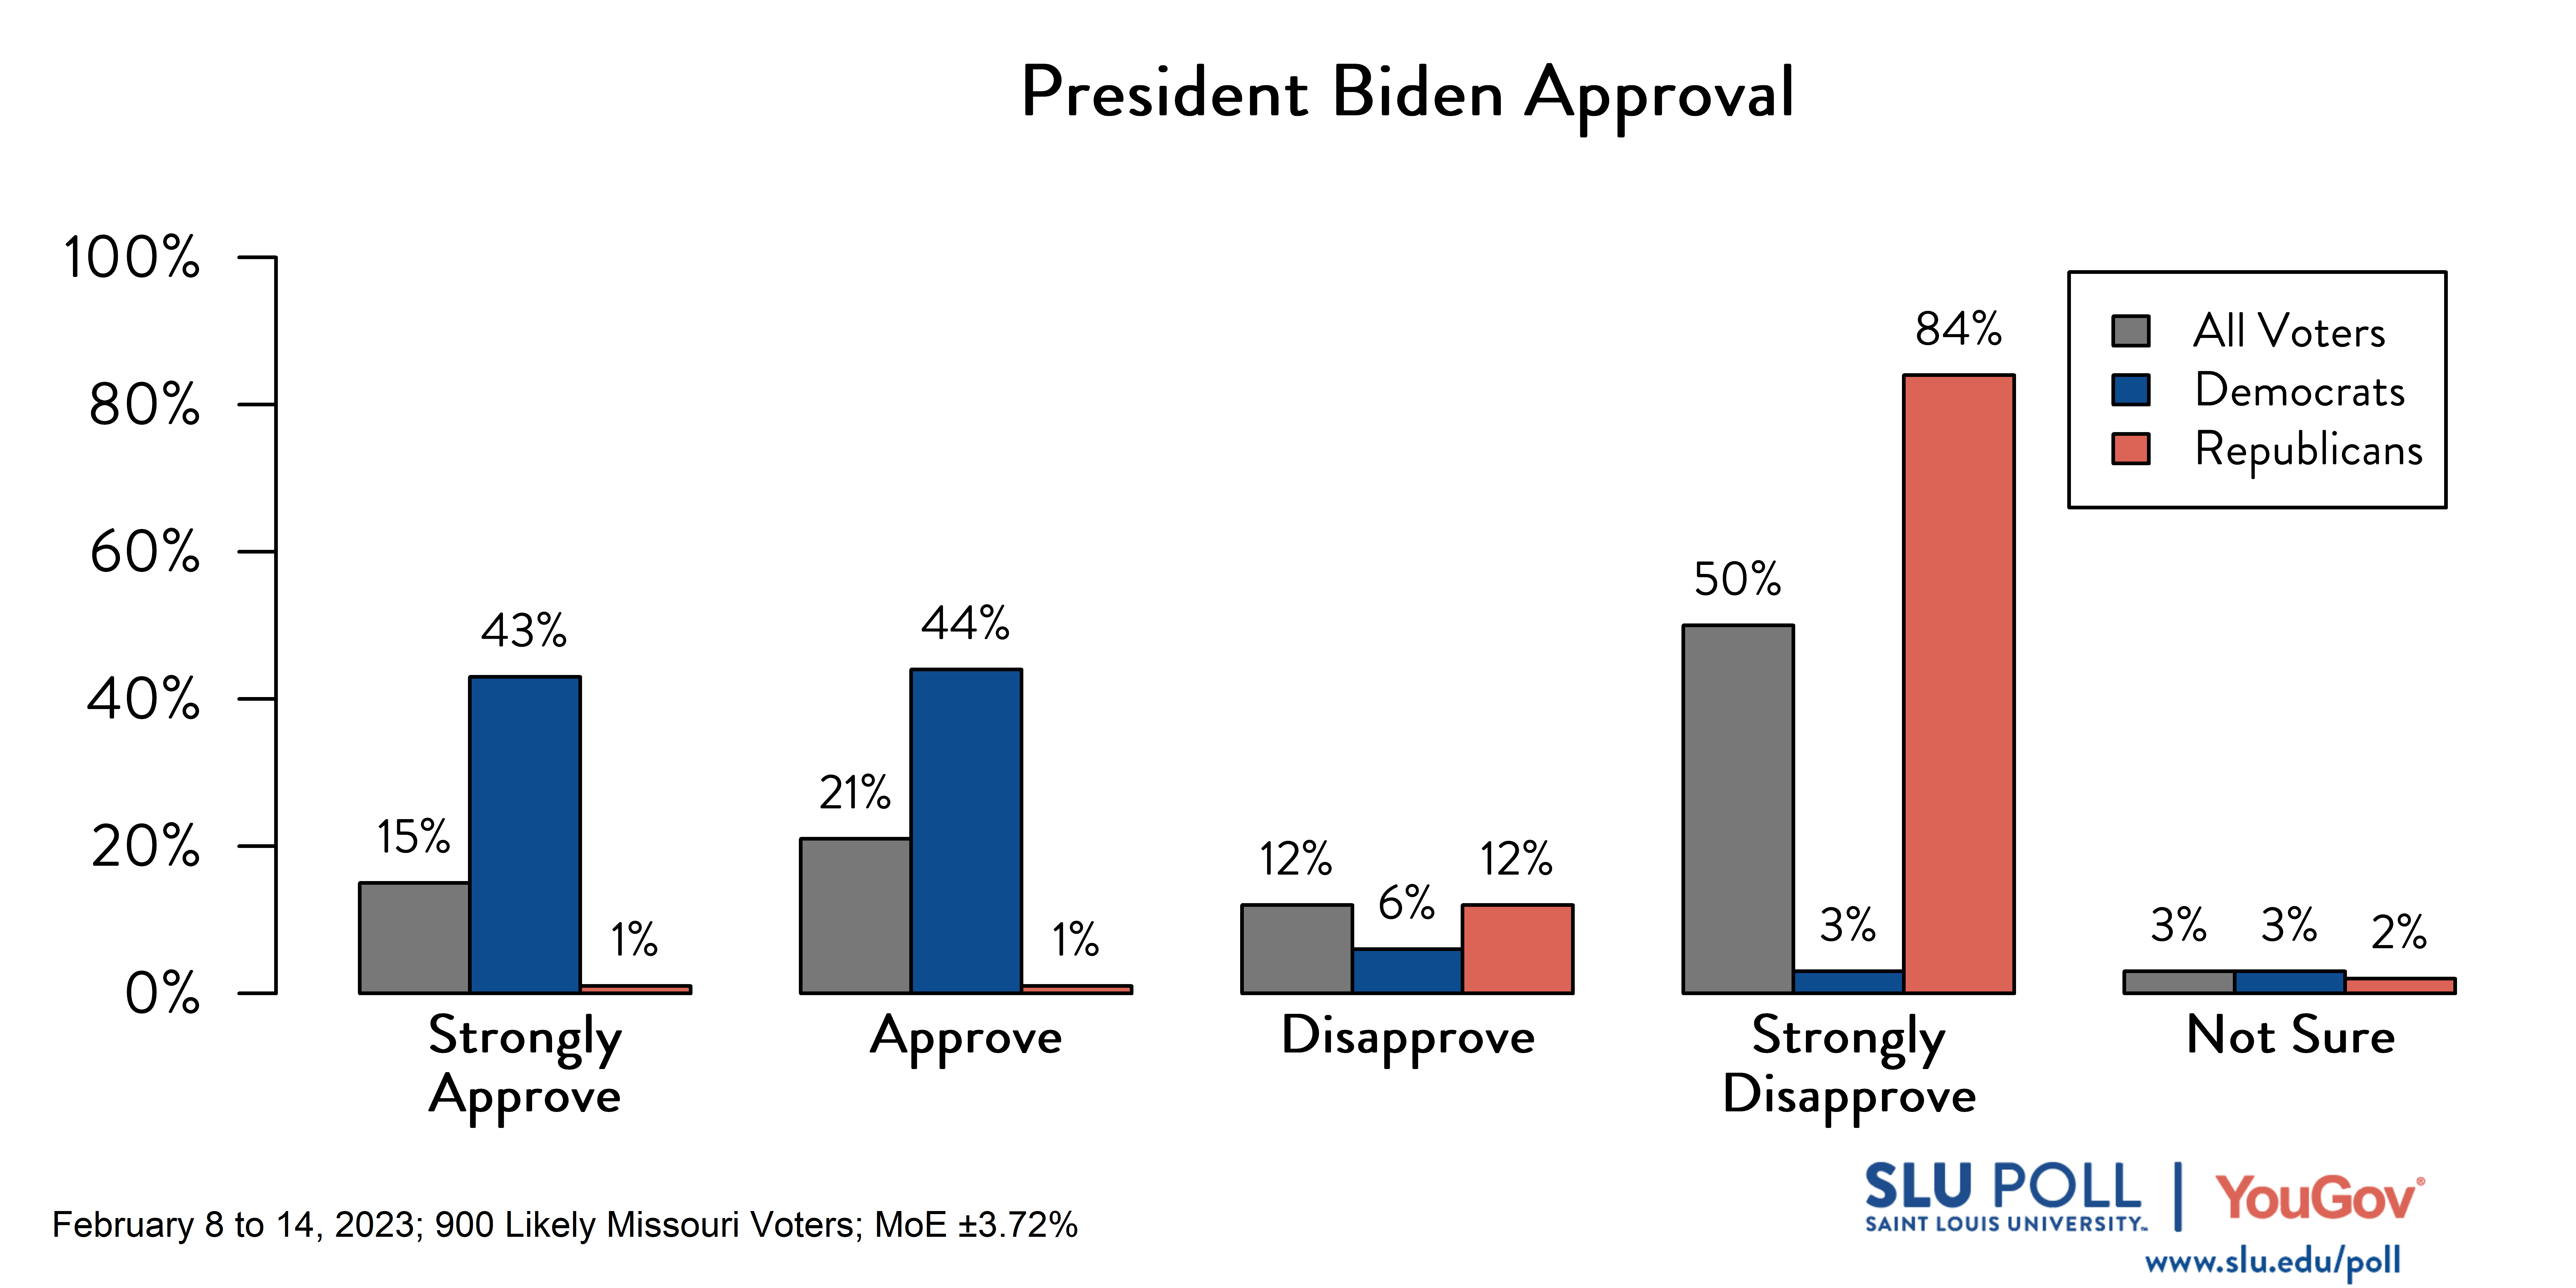 Likely voters' responses to 'Do you approve or disapprove of the way each is doing their job: President Joe Biden?': 15% Strongly approve, 21% Approve, 12% Disapprove, 50% Strongly disapprove, and 3% Not sure. Democratic voters' responses: ' 43% Strongly approve, 44% Approve, 6% Disapprove, 3% Strongly disapprove, and 3% Not sure. Republican voters' responses: 1% Strongly approve, 1% Approve, 12% Disapprove, 84% Strongly disapprove, and 2% Not sure. 